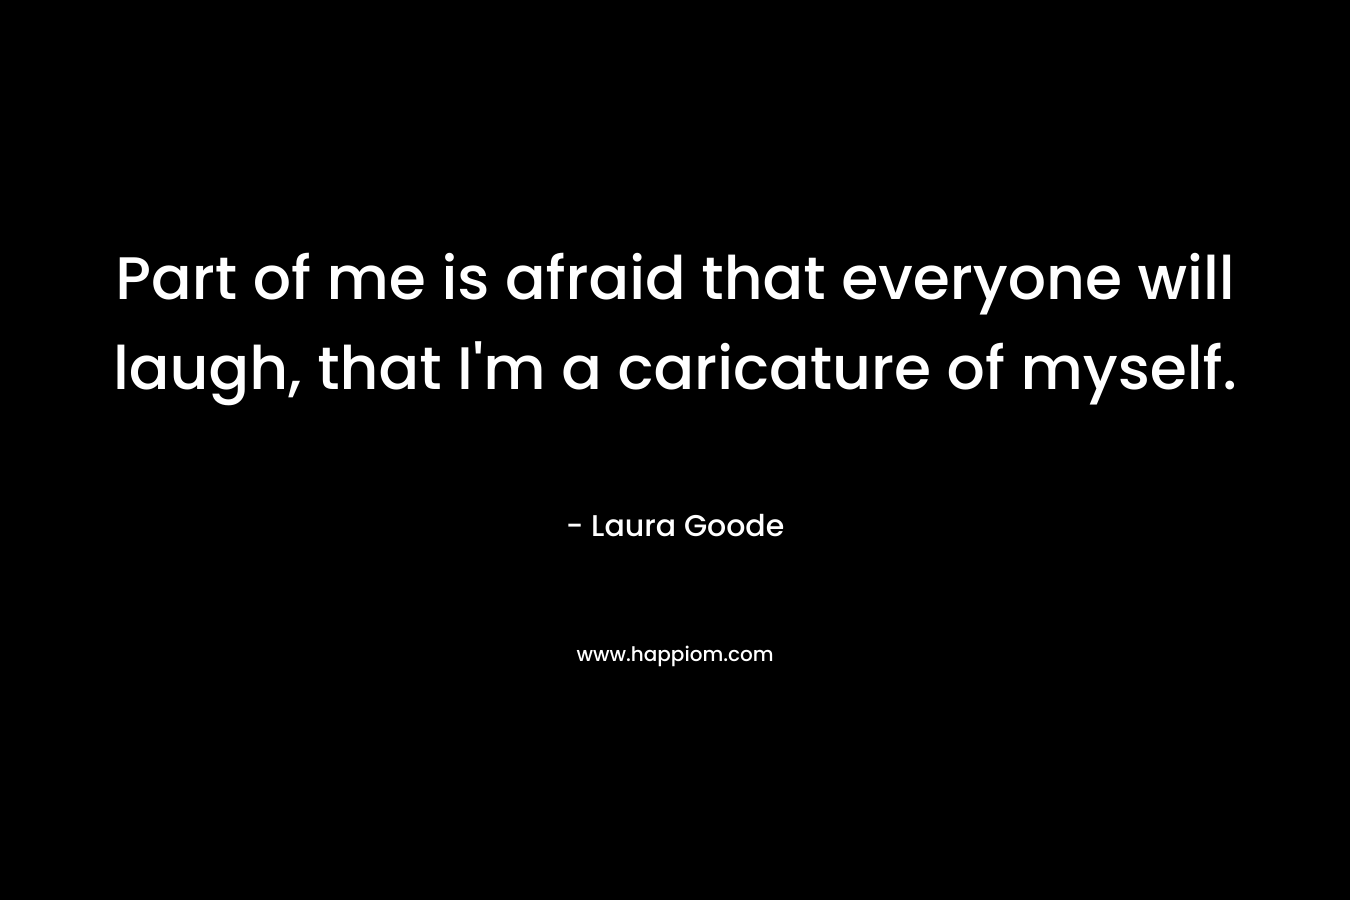 Part of me is afraid that everyone will laugh, that I’m a caricature of myself. – Laura Goode